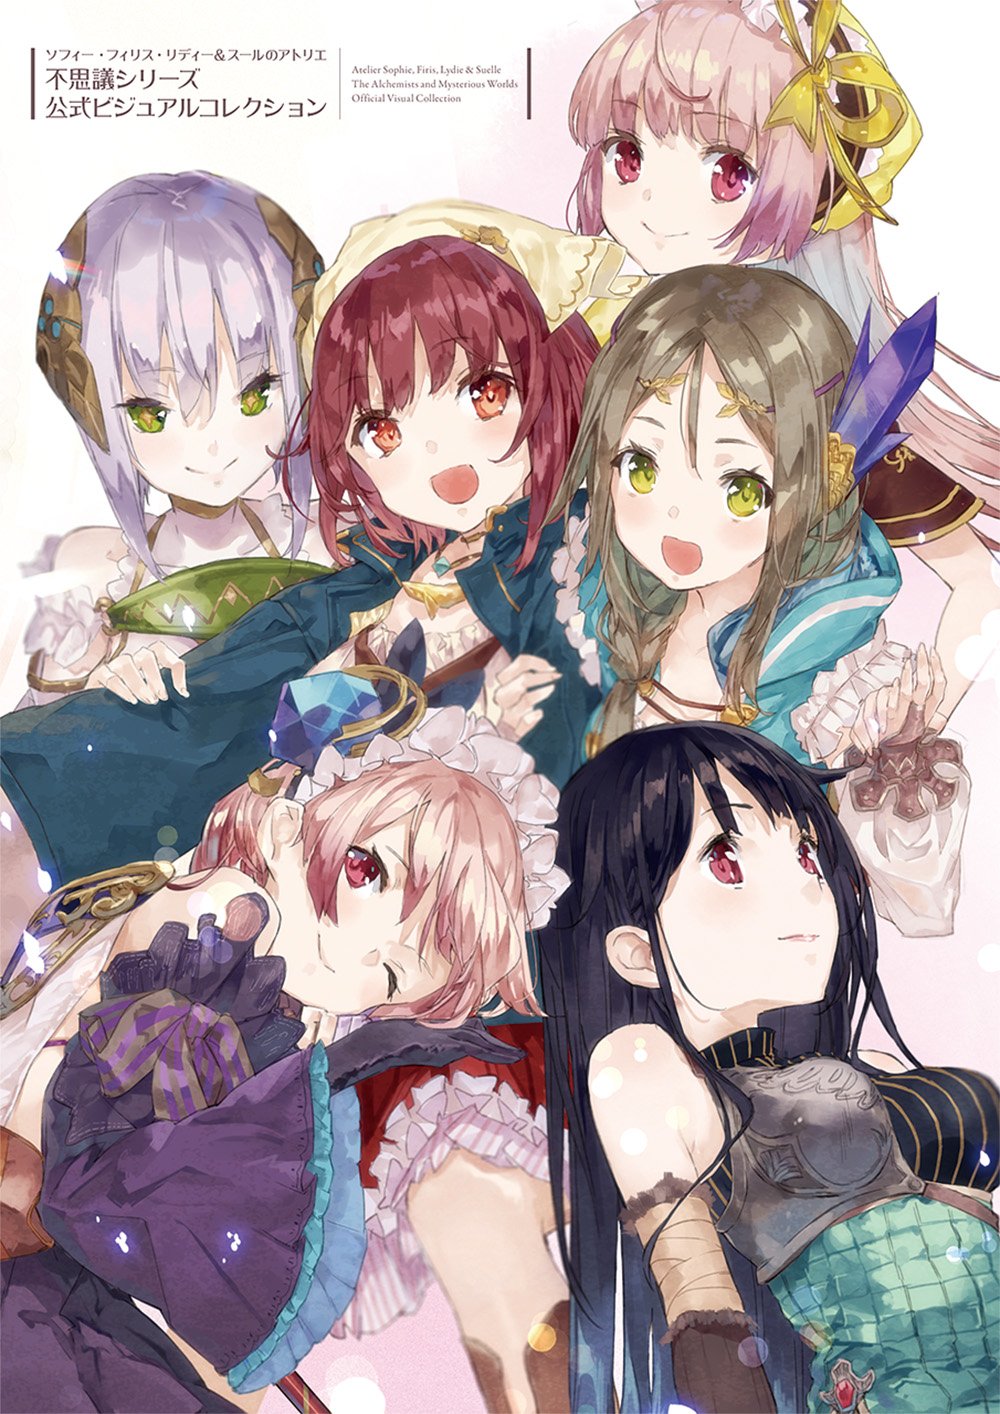 Sophie Phyllis Liddy & Sur's Atelier Wonder Series Official Visual Collection JAPANESE GAME BOOK